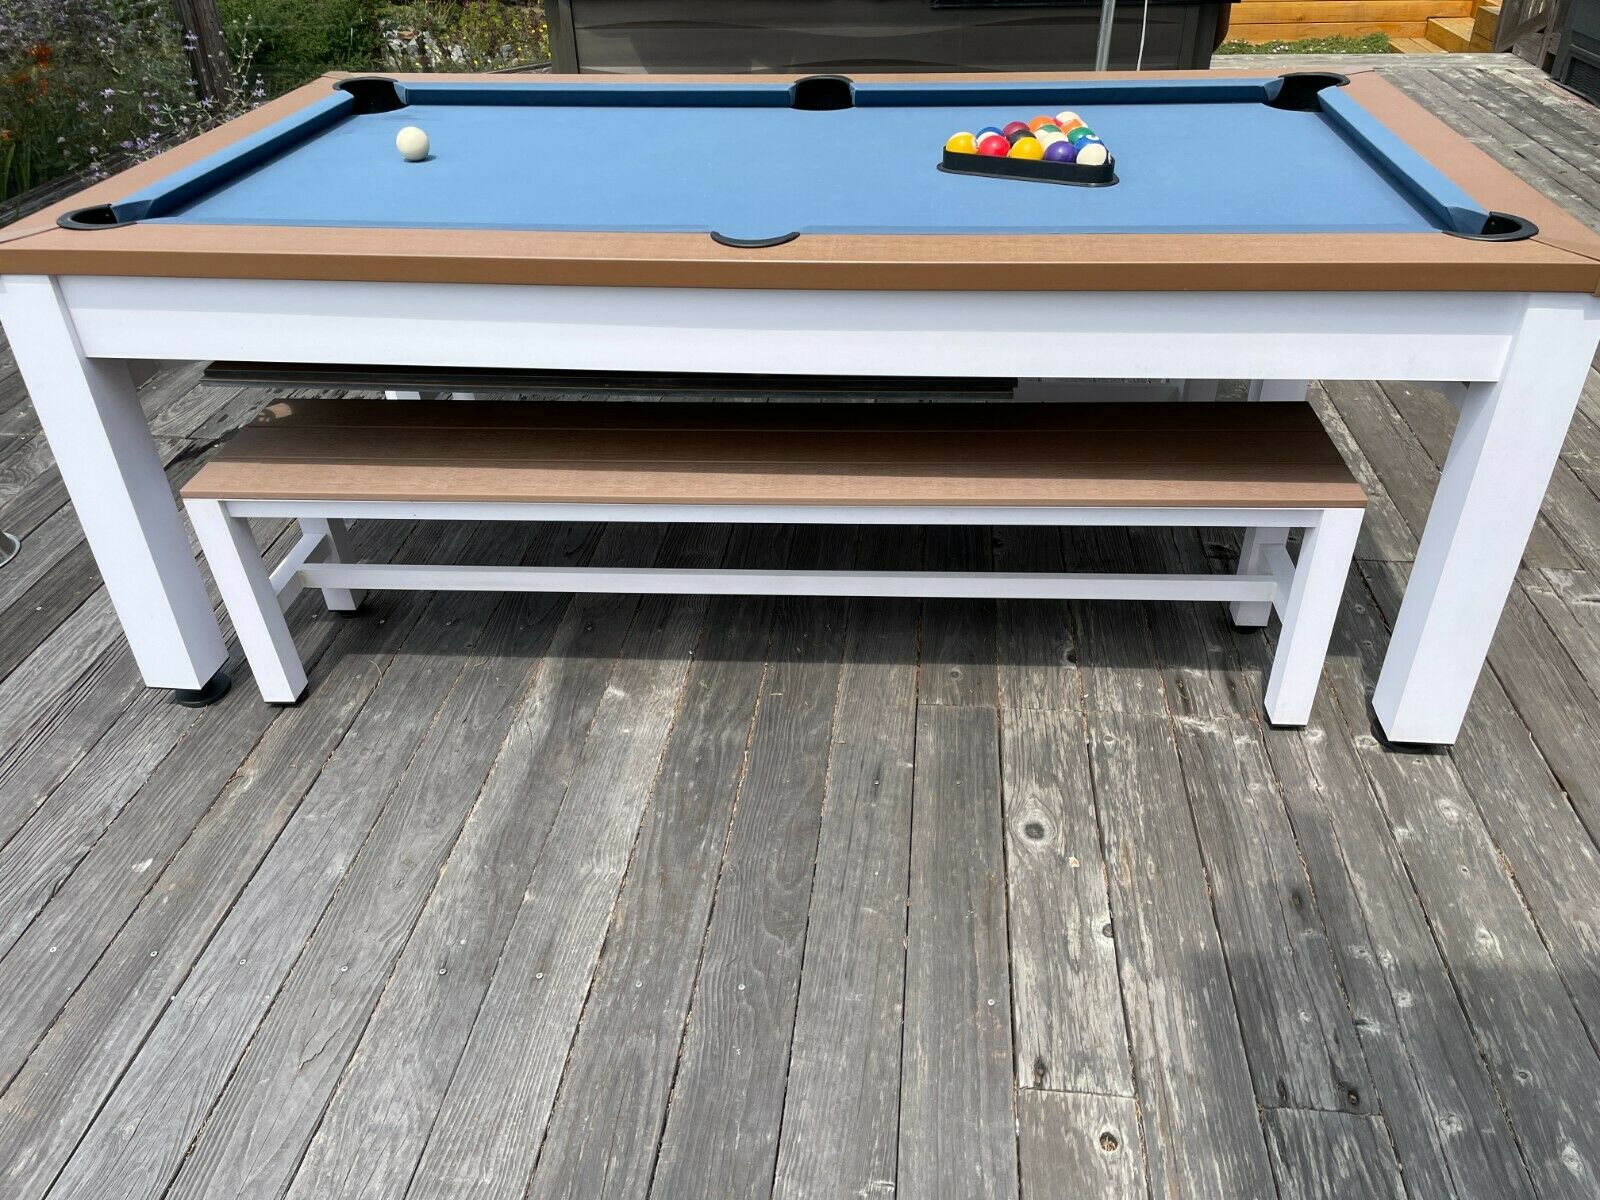 Spencer Marston Newport 7' Outdoor Pool Table Pool, Sapphire Blue Cloth